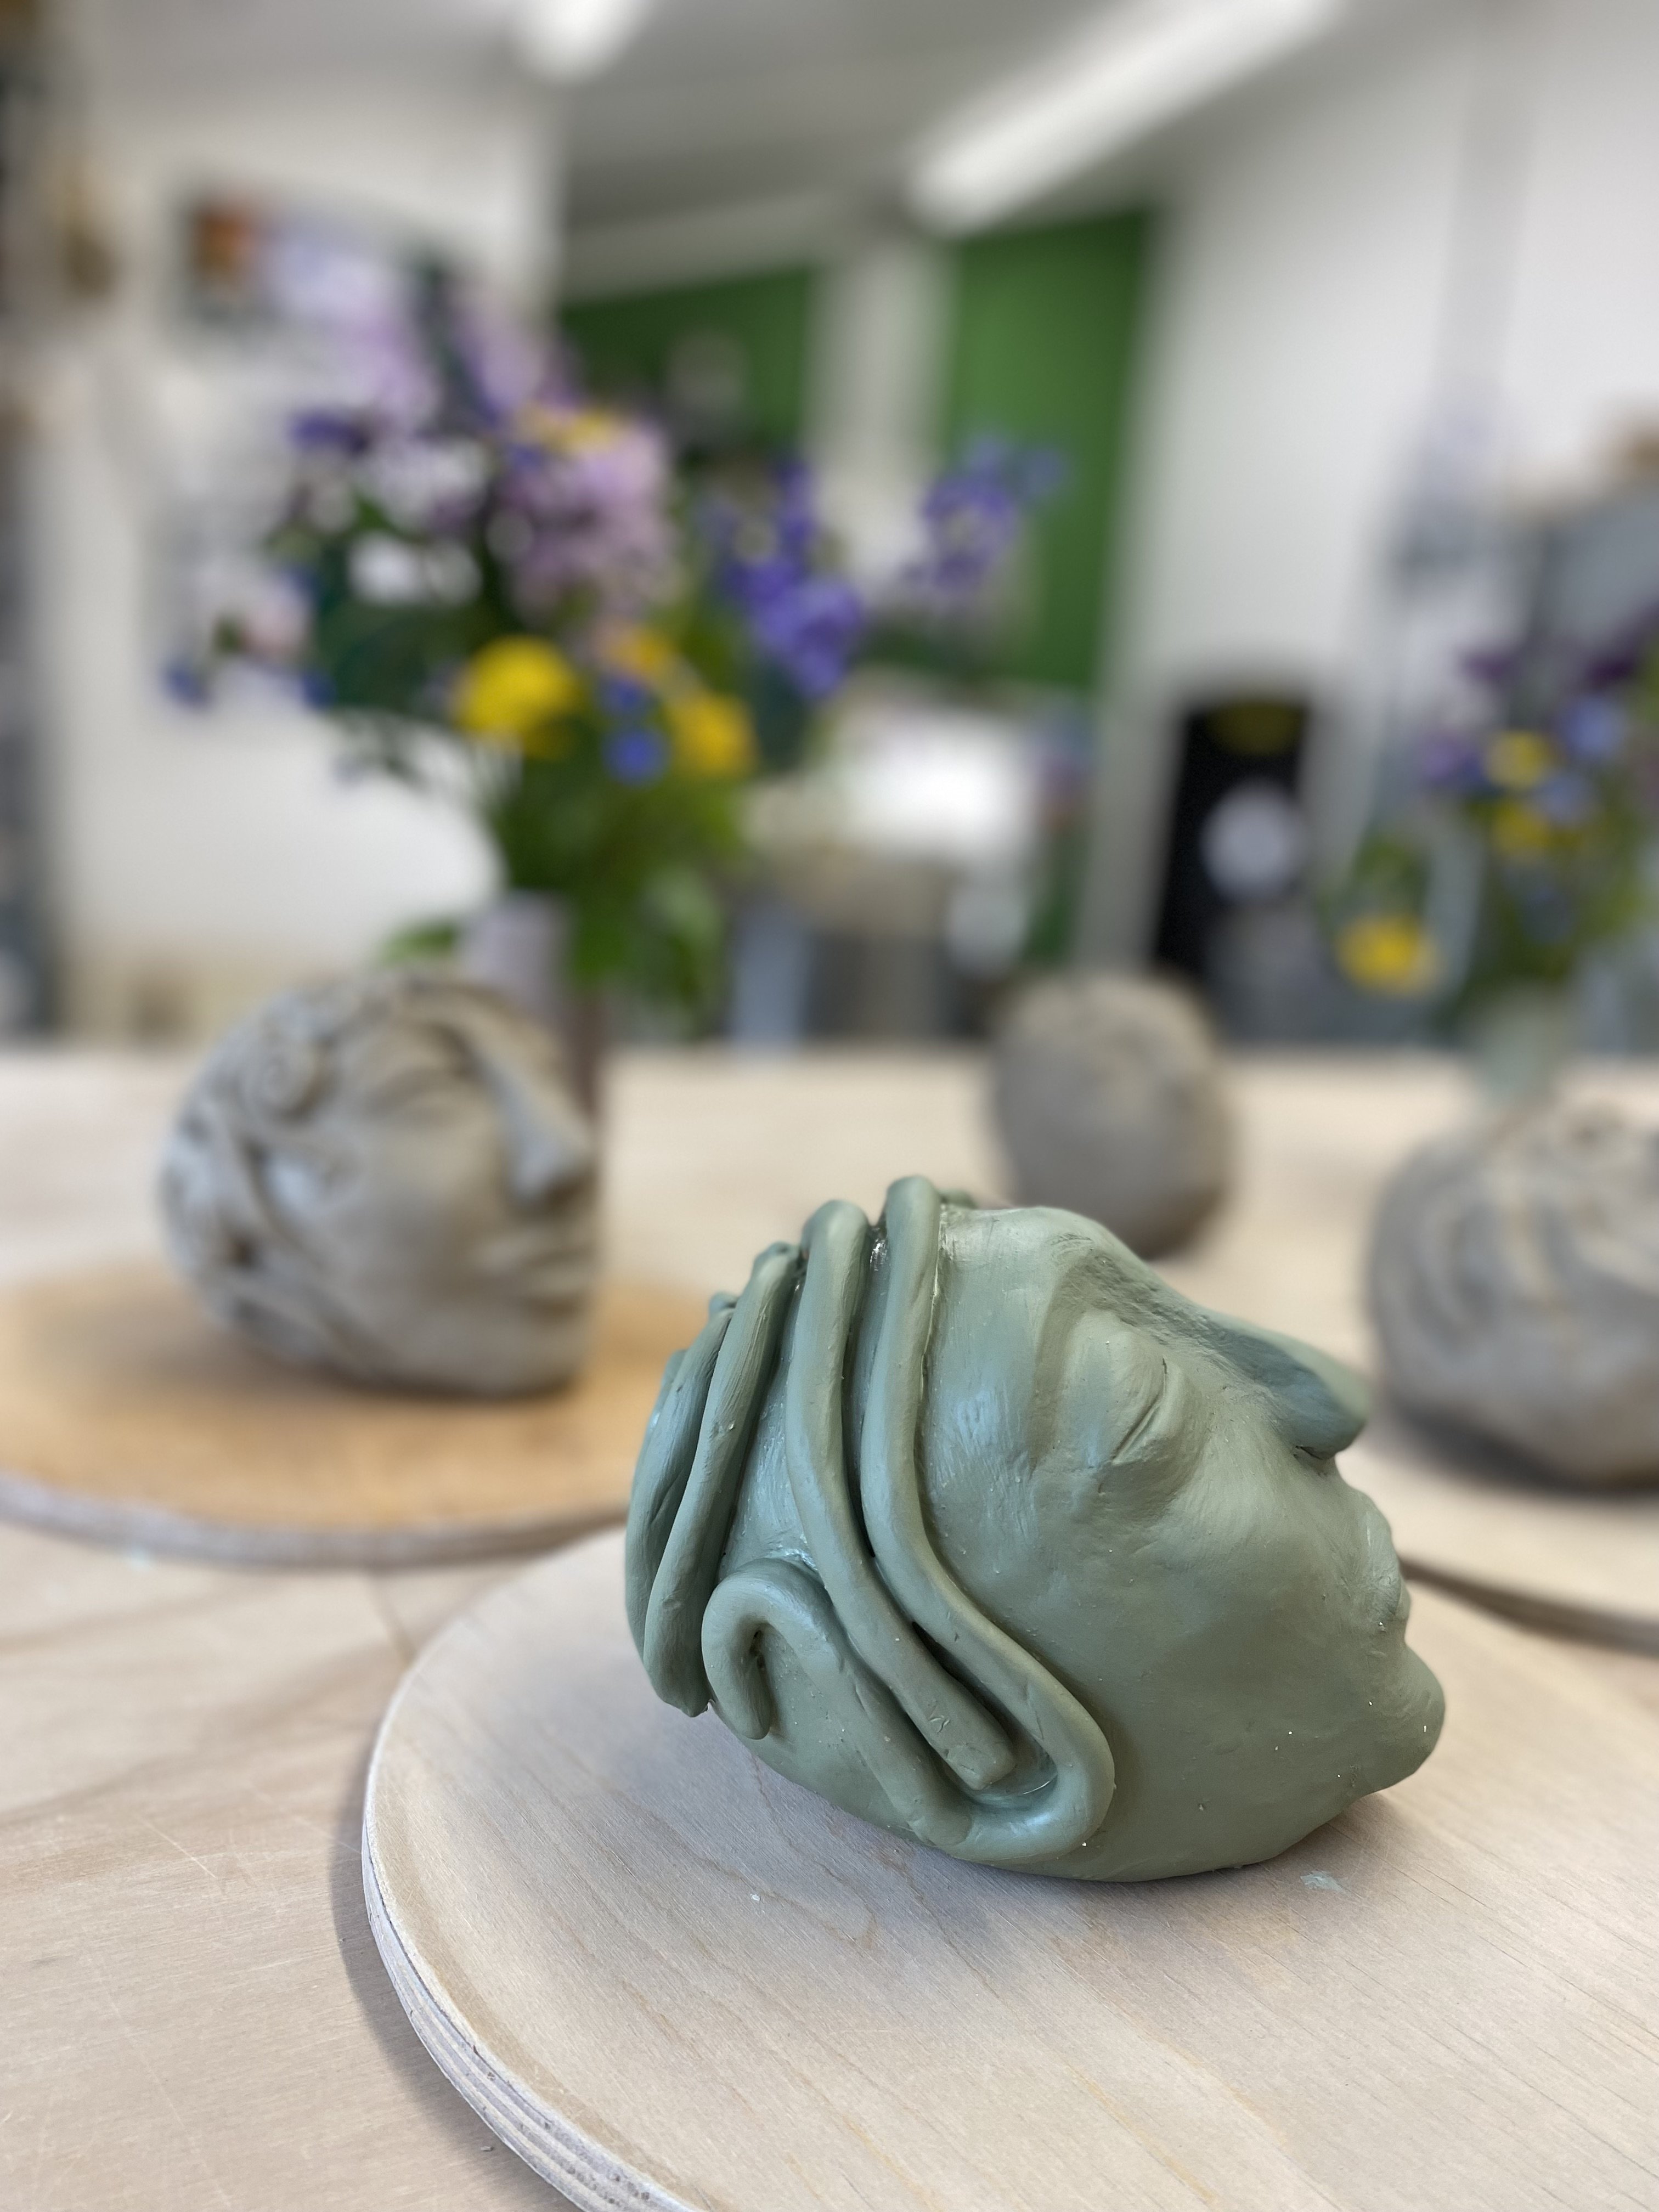 MINDFULNESS WITH CLAY WORKSHOP